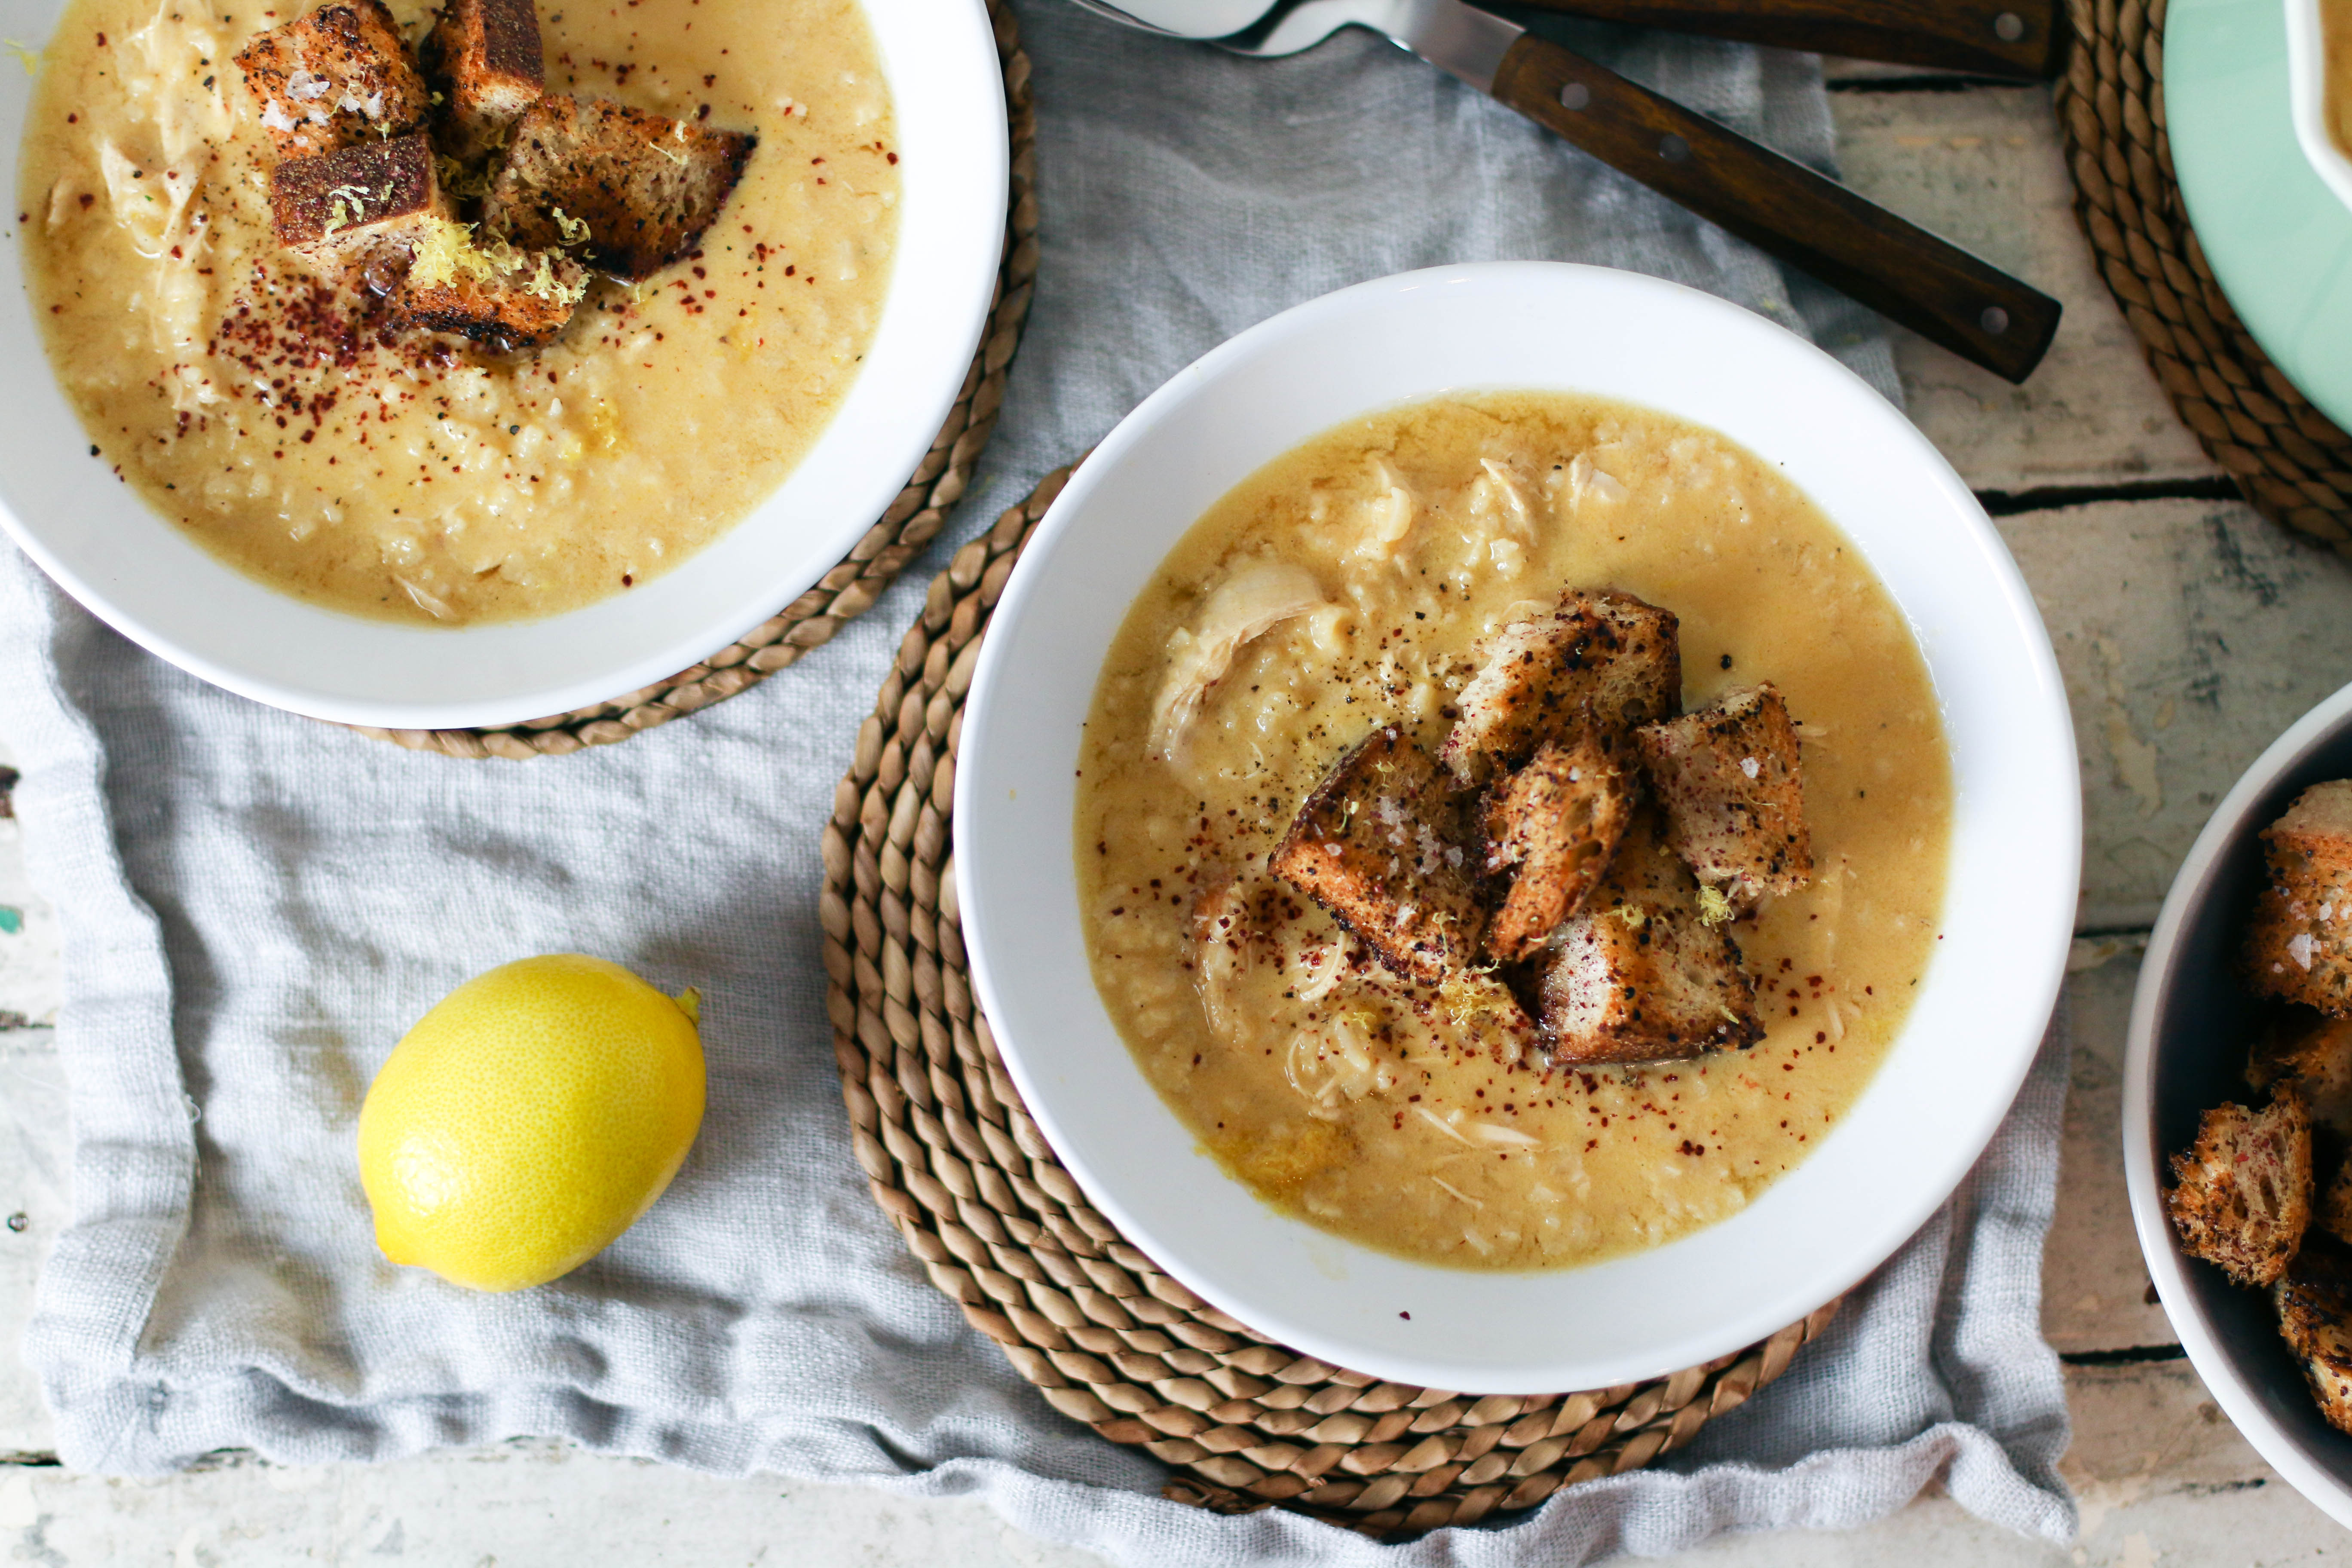 Lemony Chicken & Rice Soup with Sumac Croutons | I Will Not Eat Oysters